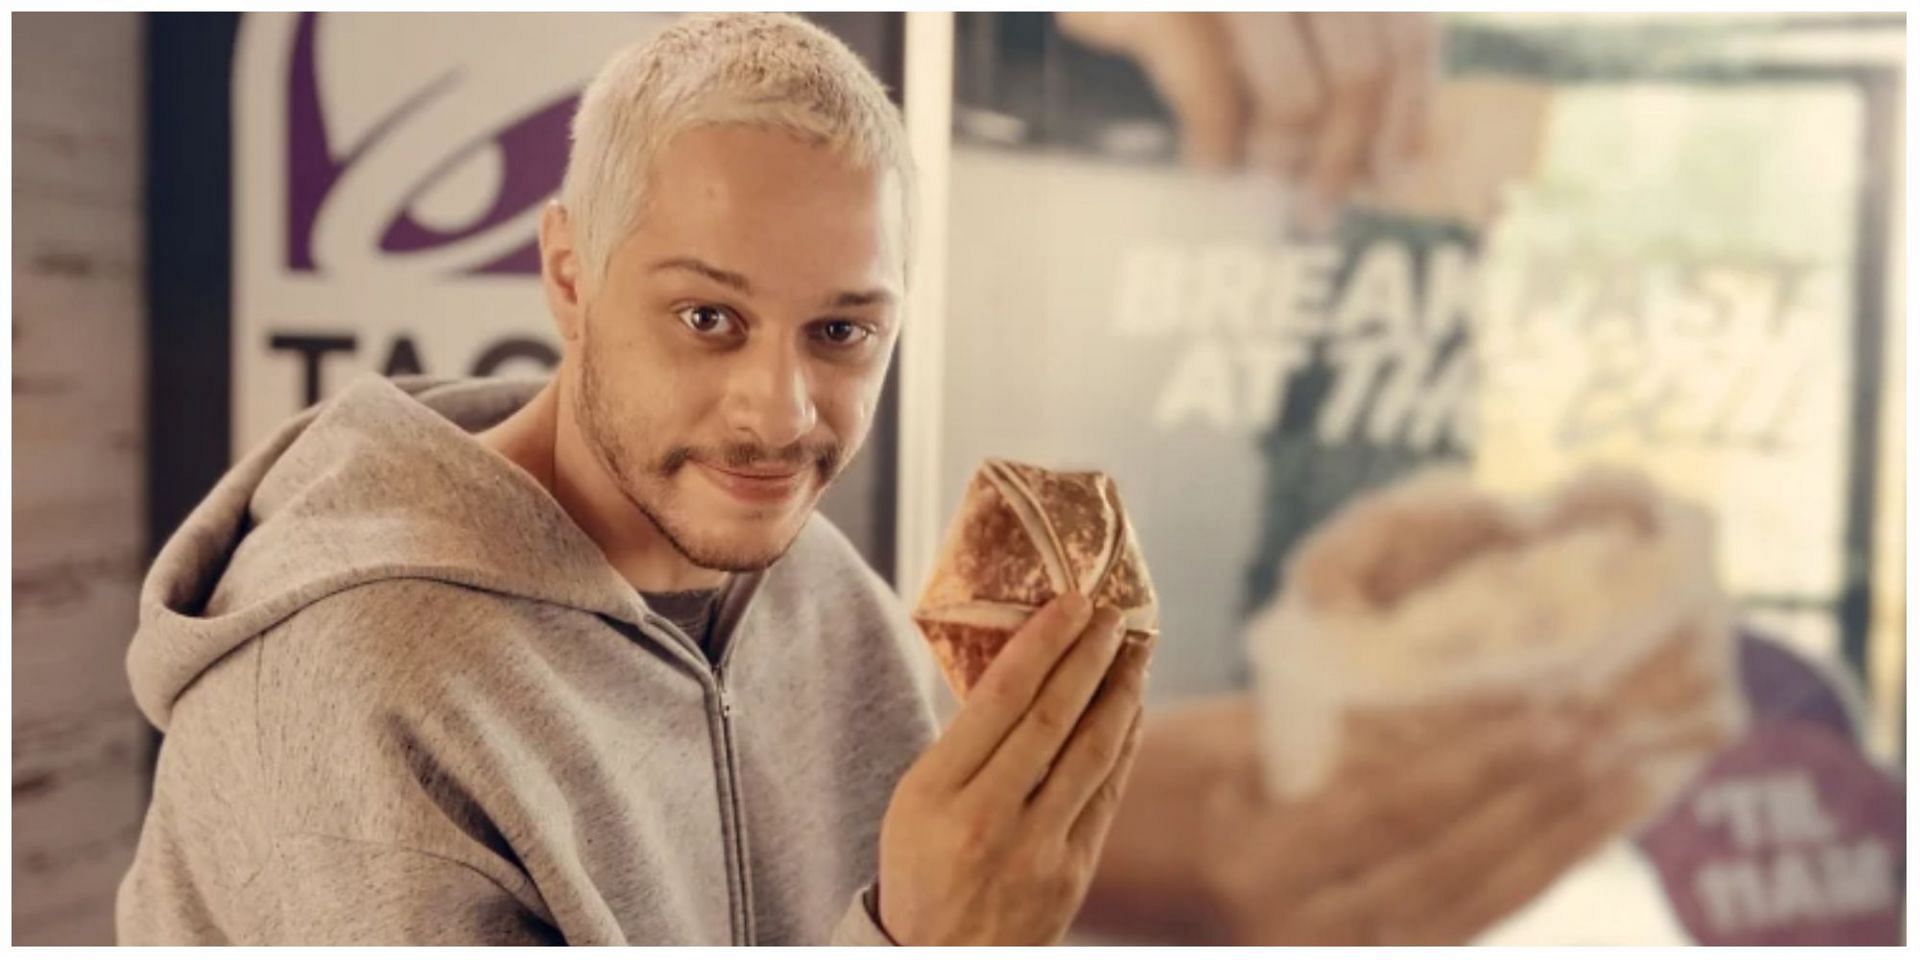 Pete Davidson and the Taco Bell ad slammed by netizens for being weird and absurd. (Image via Taco Bell)